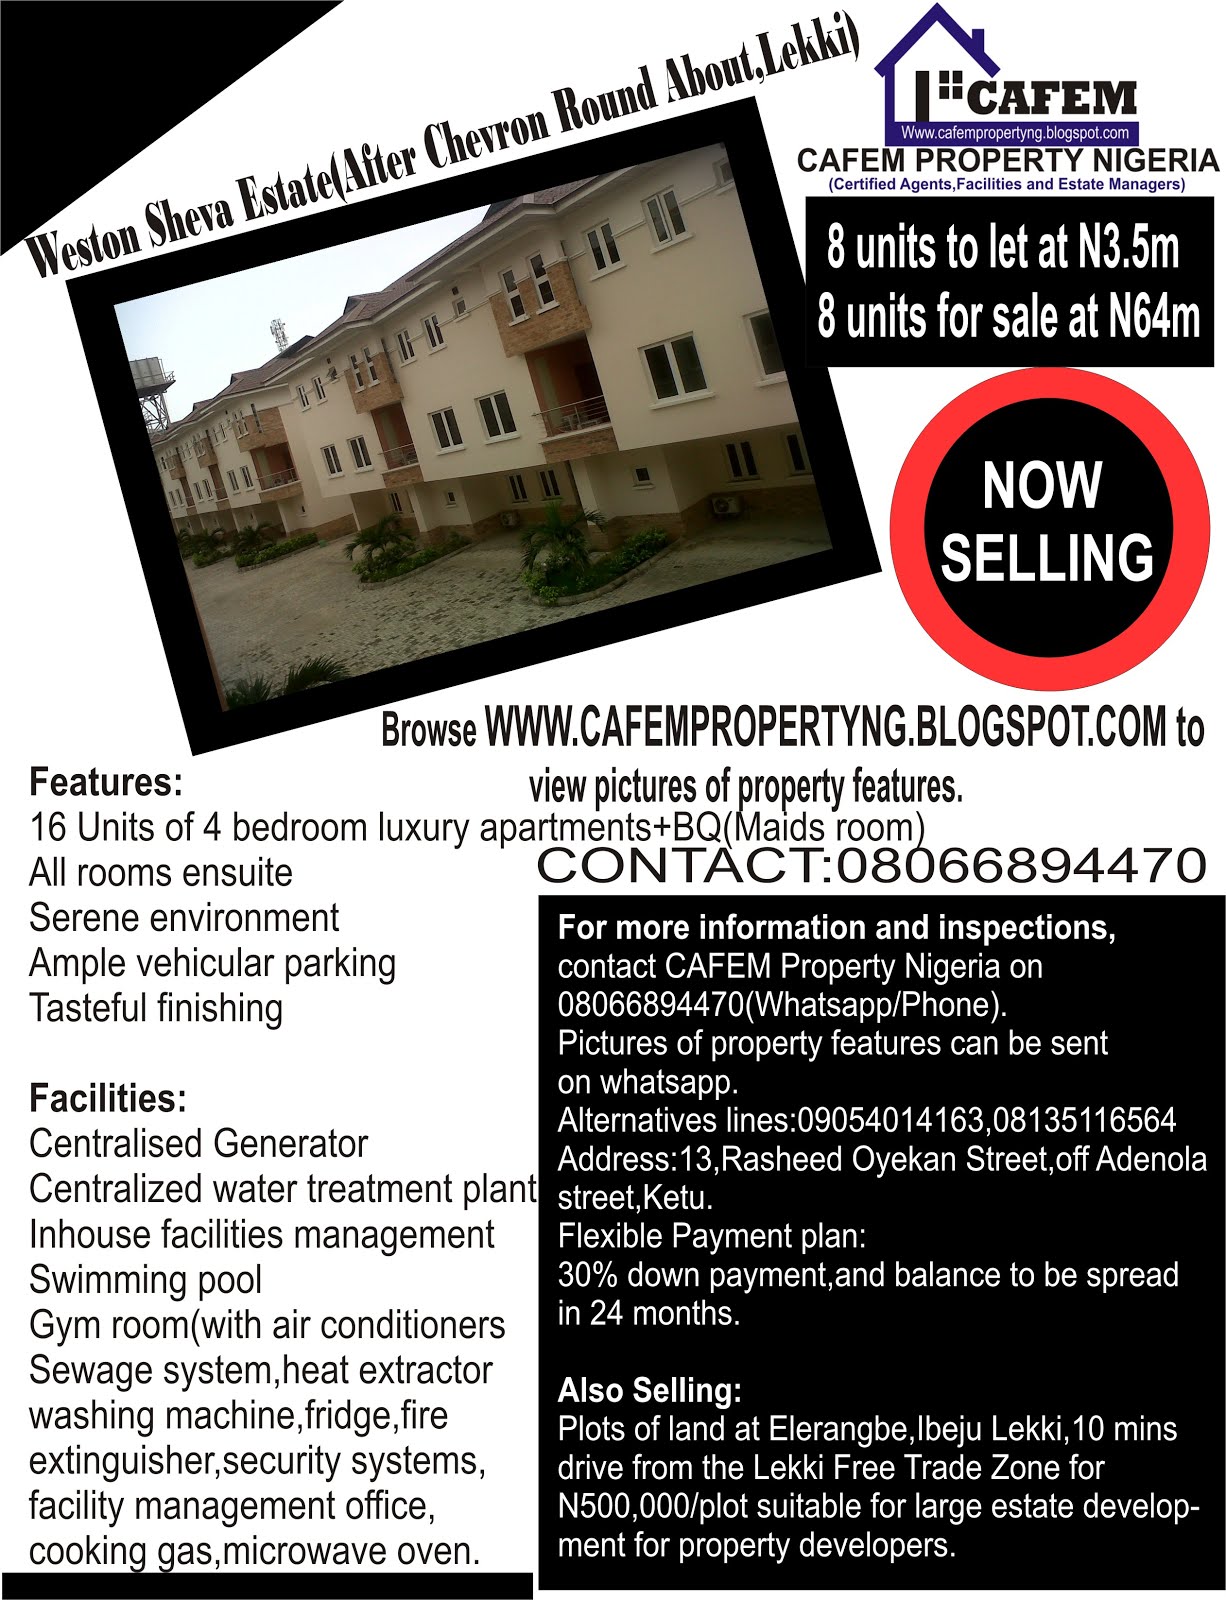 Weston Sheva Estate:Click here for pictures of 4 bedroom luxury terrace houses for sale at N64m